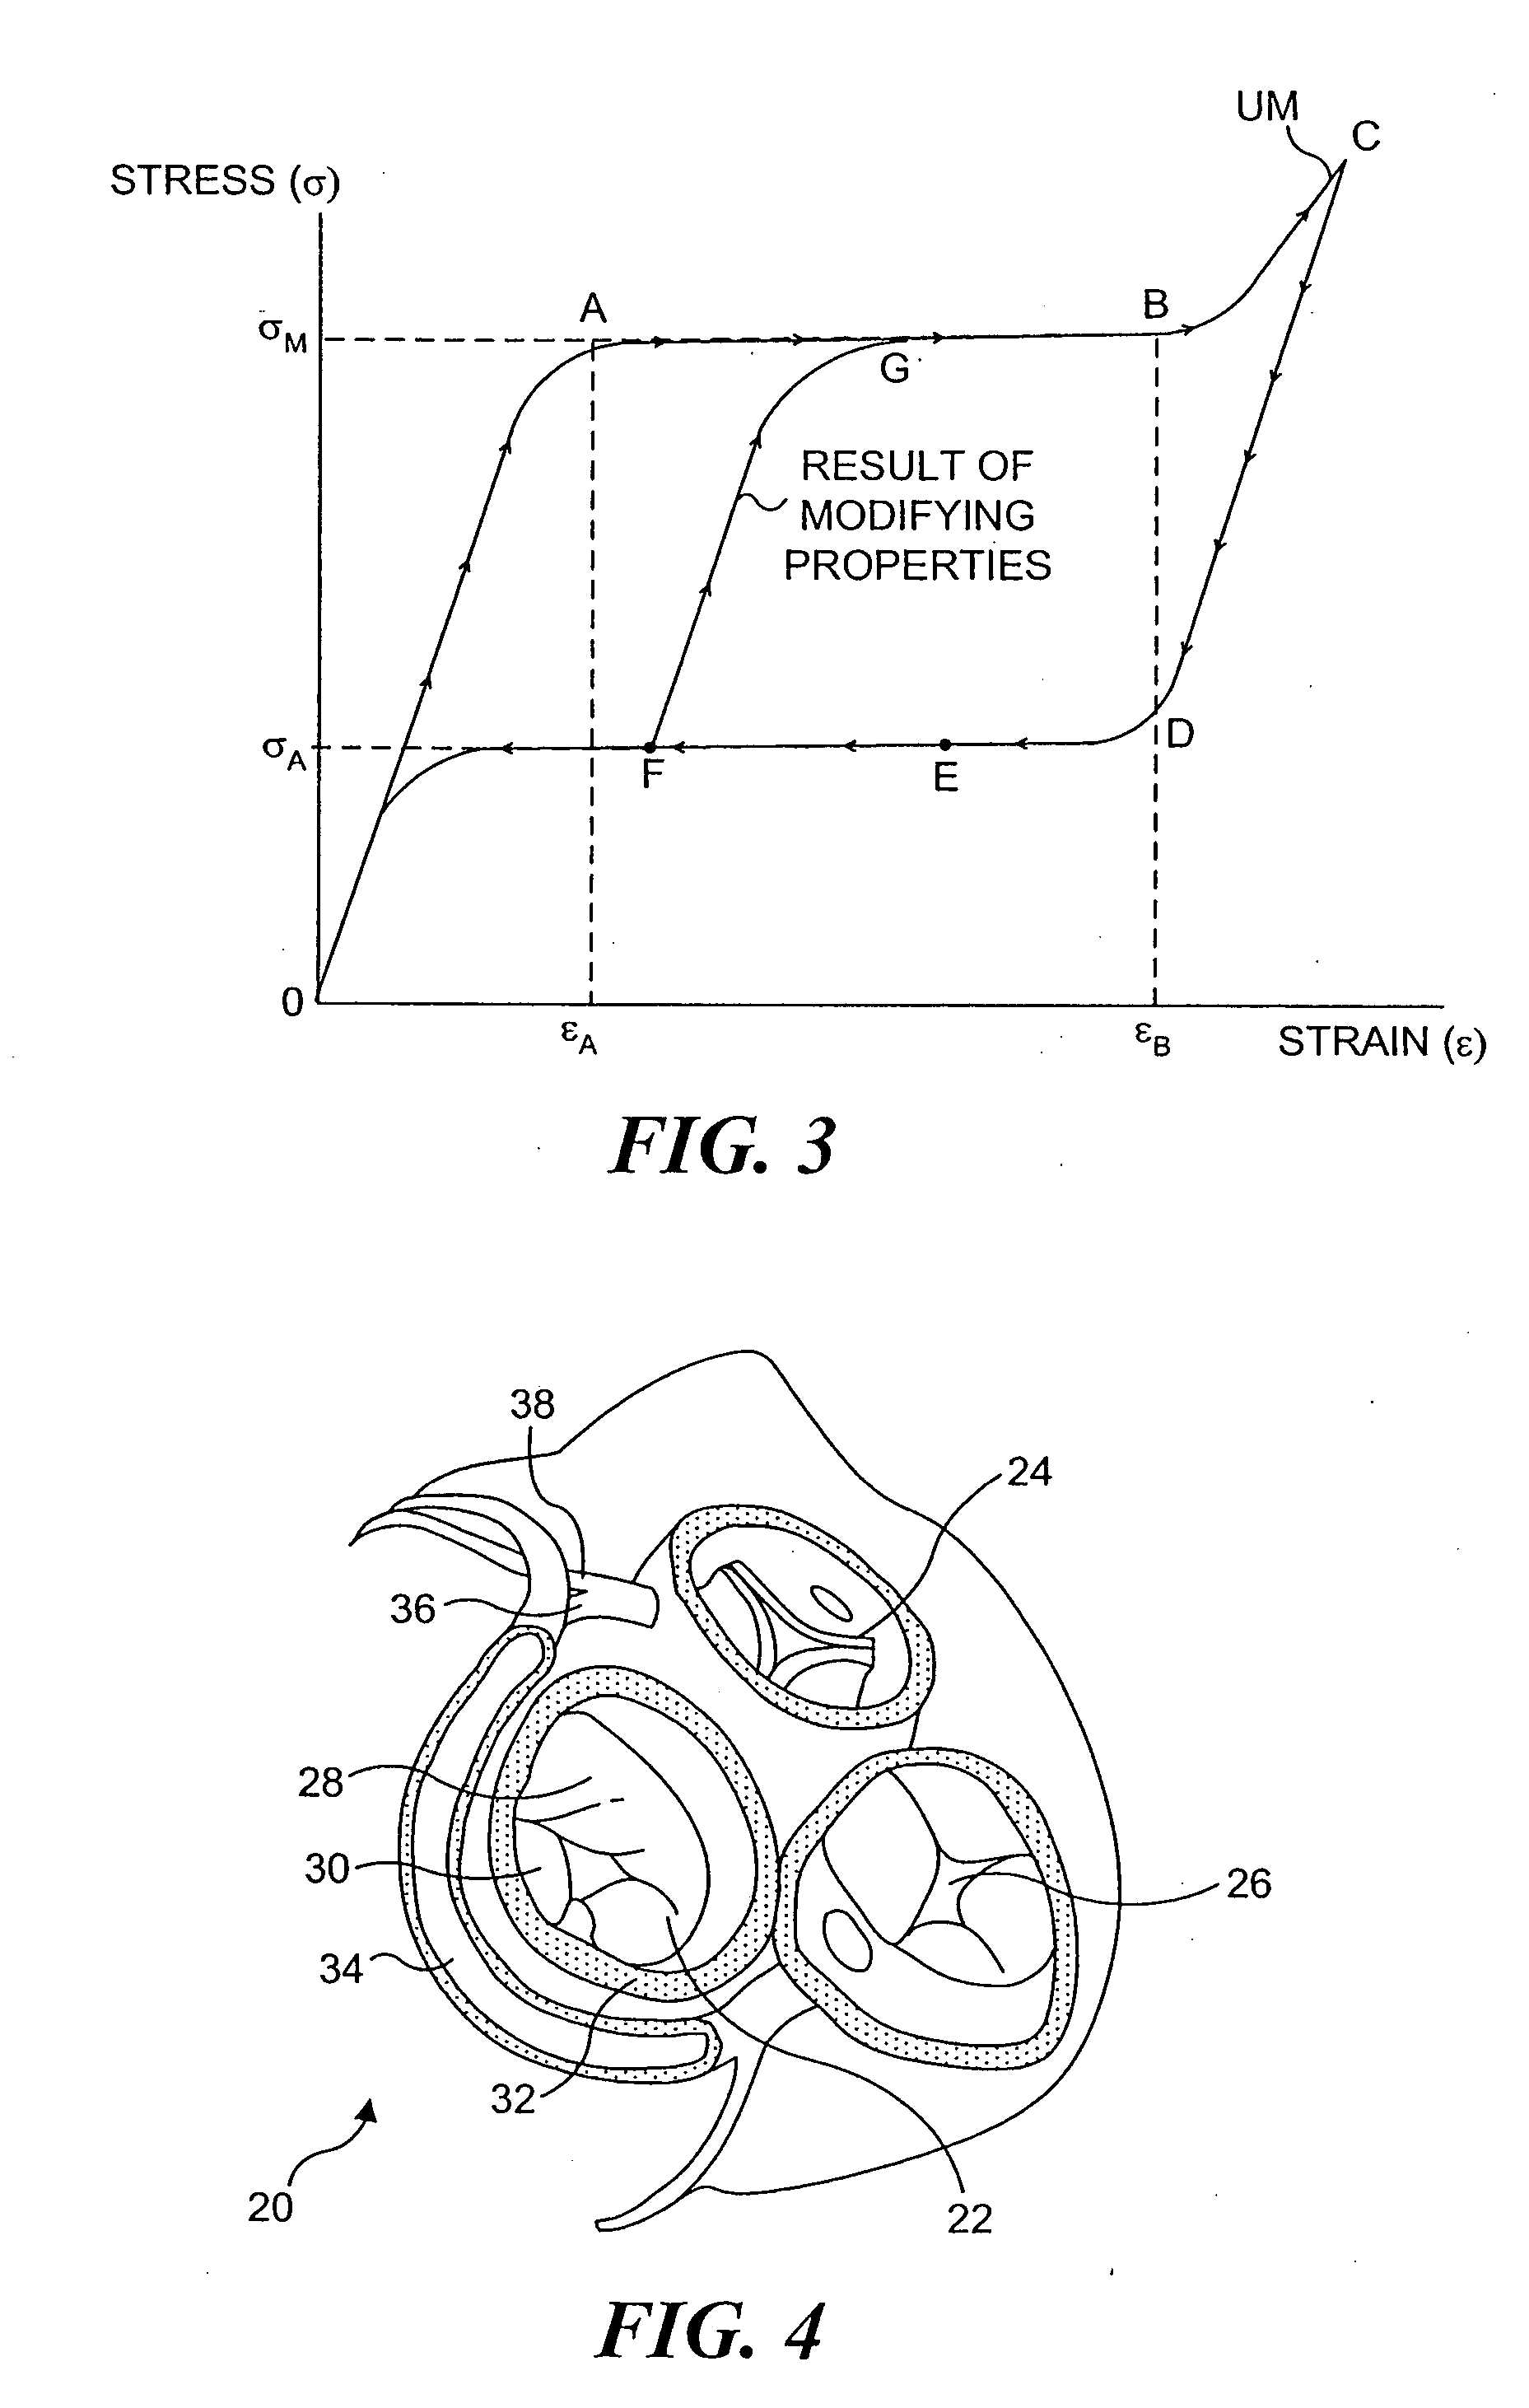 Mitral valve device using conditioned shape memory alloy